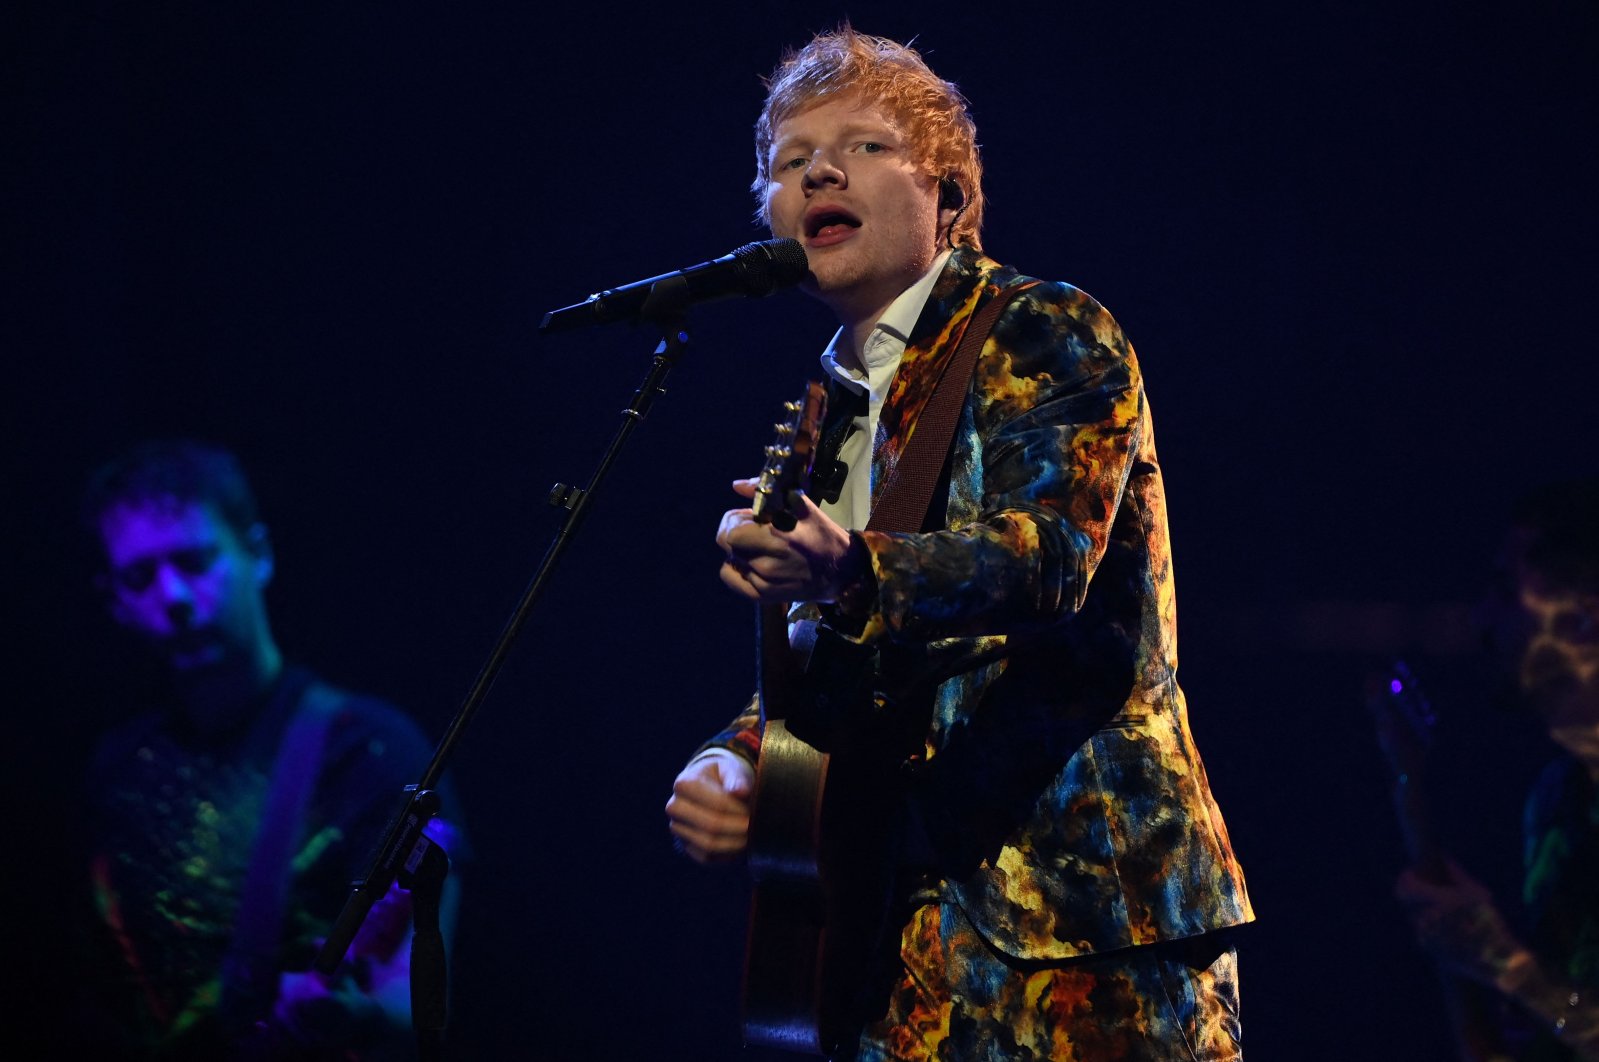 English singer-songwriter Ed Sheeran performs on stage during the MTV Europe Music Awards at the Laszlo Papp Budapest Sports Arena in Budapest, Hungary, Nov. 14, 2021. (AFP)